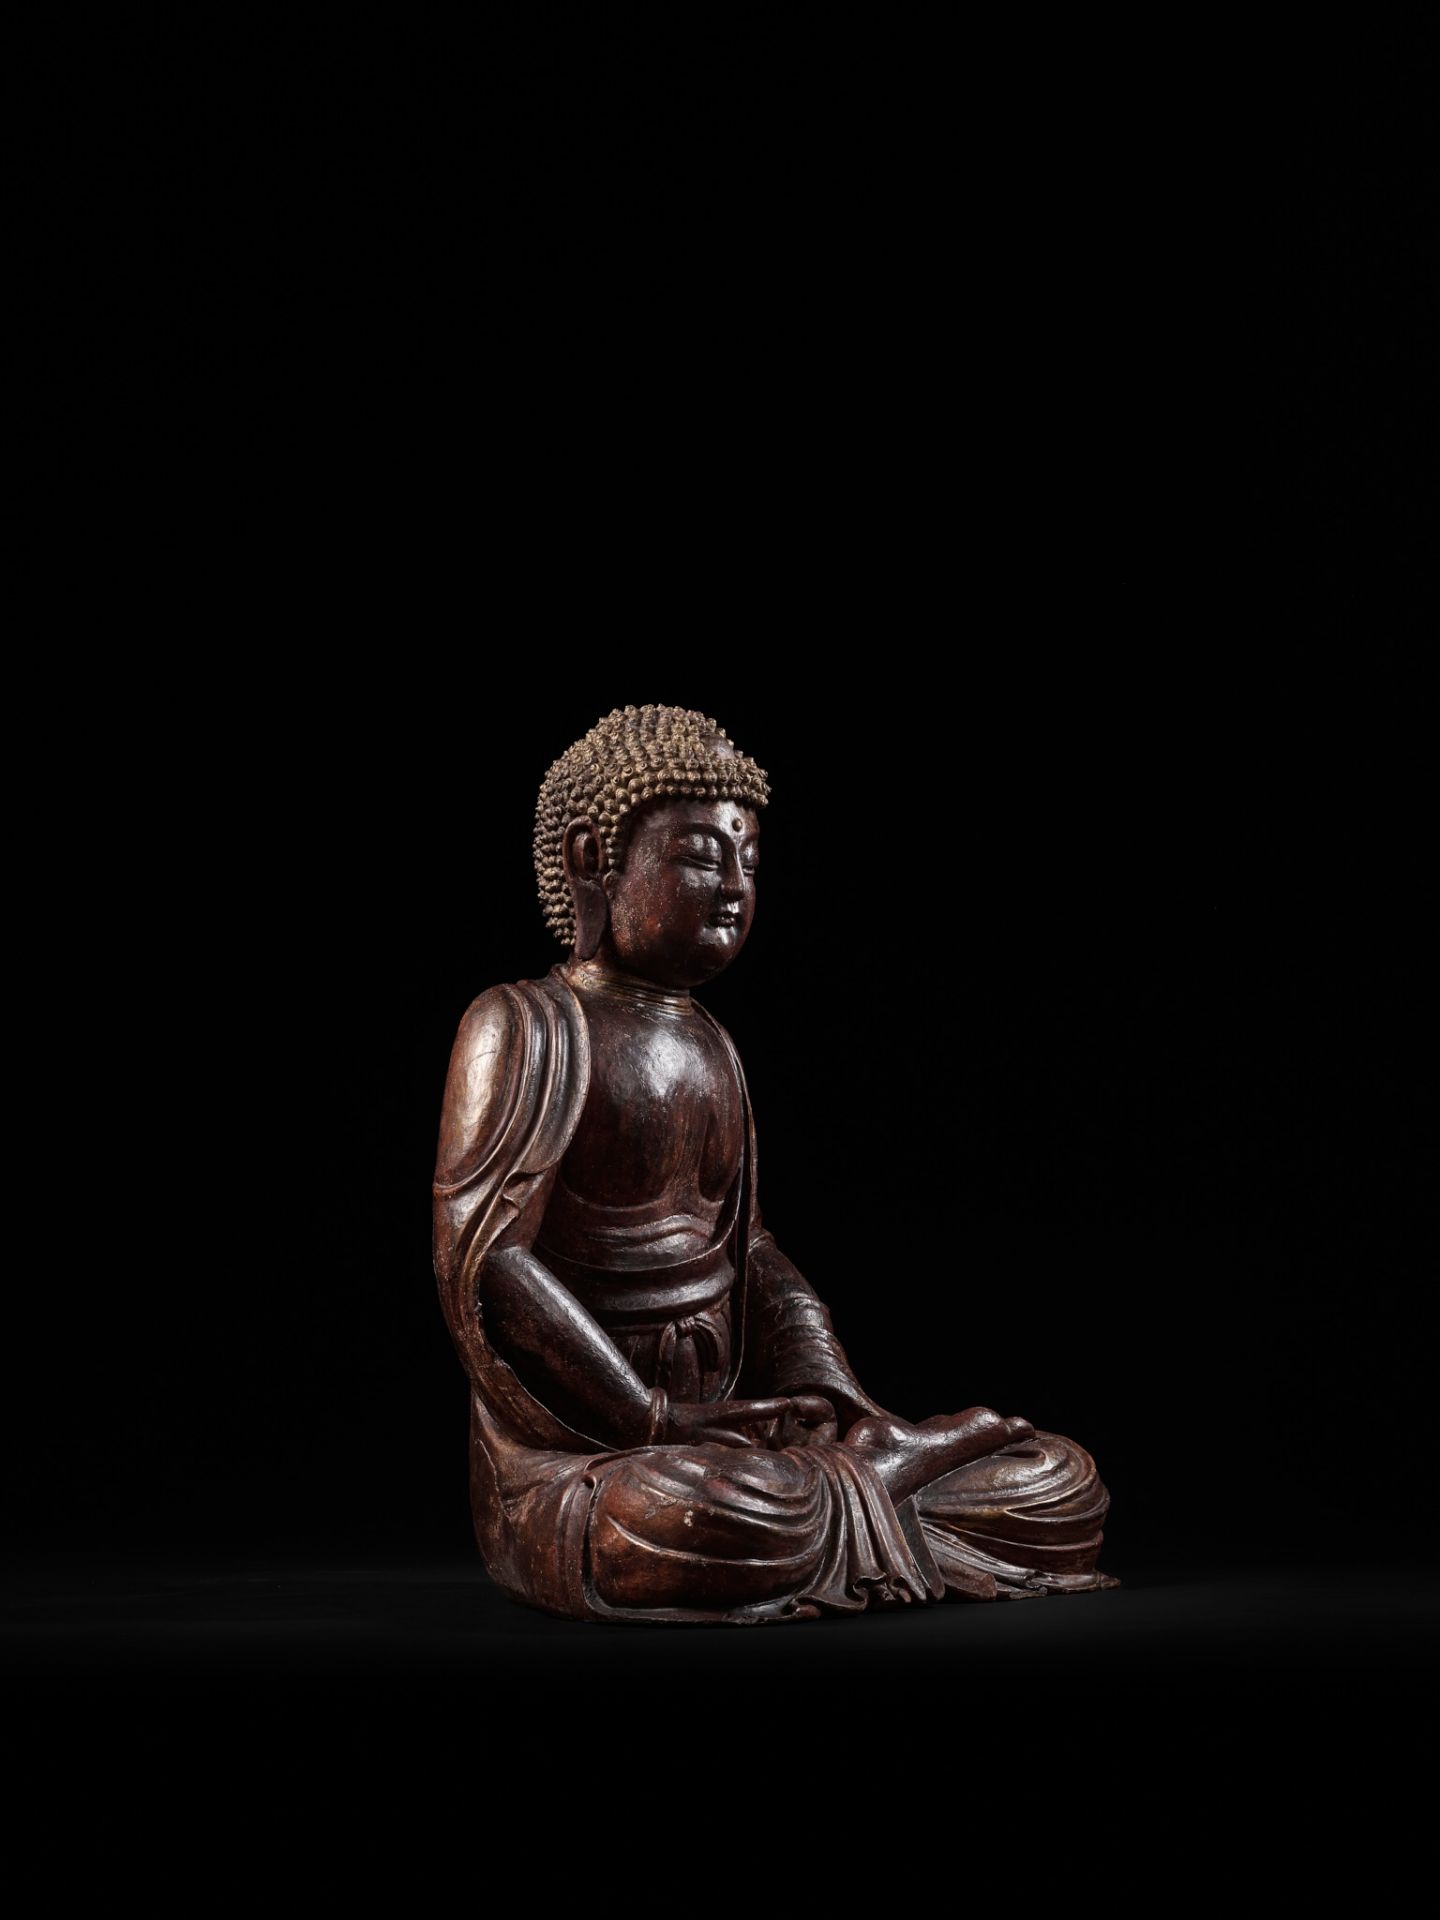 A LARGE LACQUERED WOOD FIGURE OF BUDDHA, LATE MING/EARLY QING DYNASTY, CIRCA 17TH CENTURY - Image 7 of 9